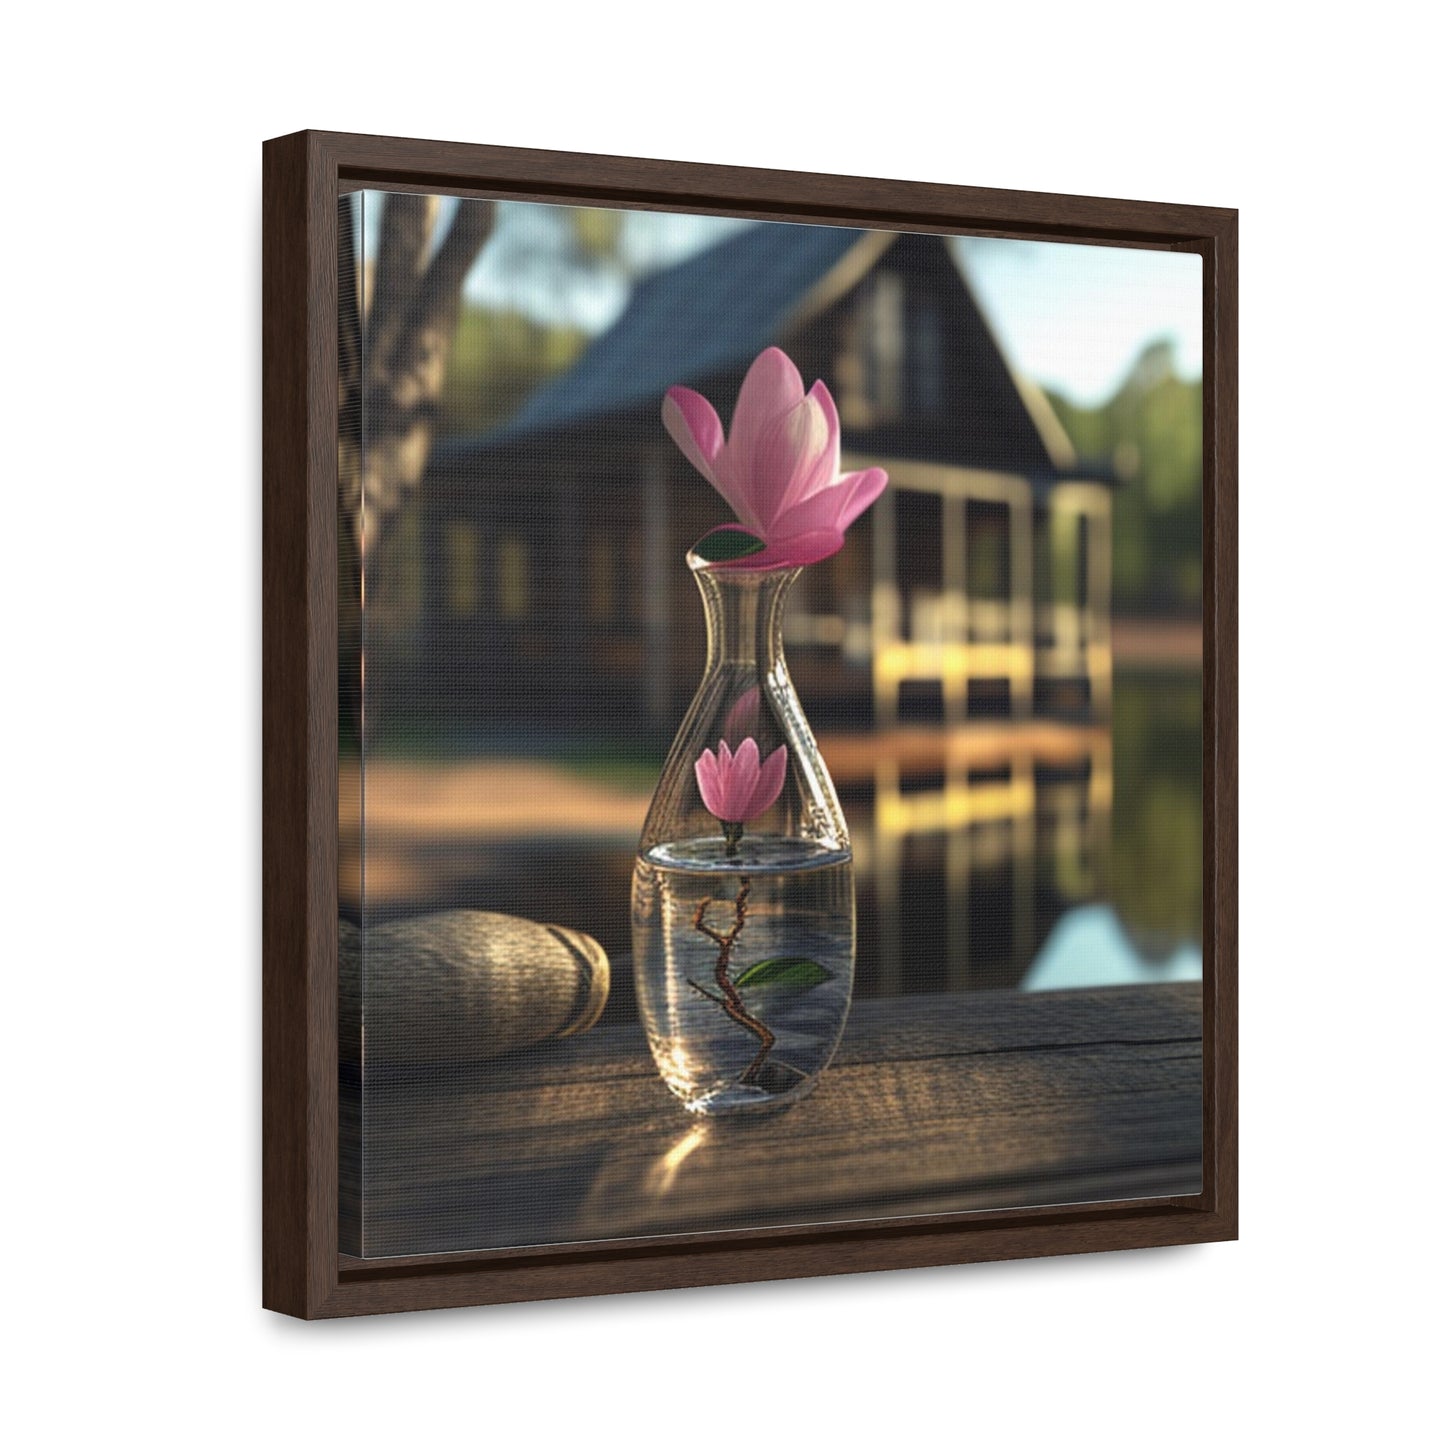 Gallery Canvas Wraps, Square Frame Magnolia in a Glass vase 4